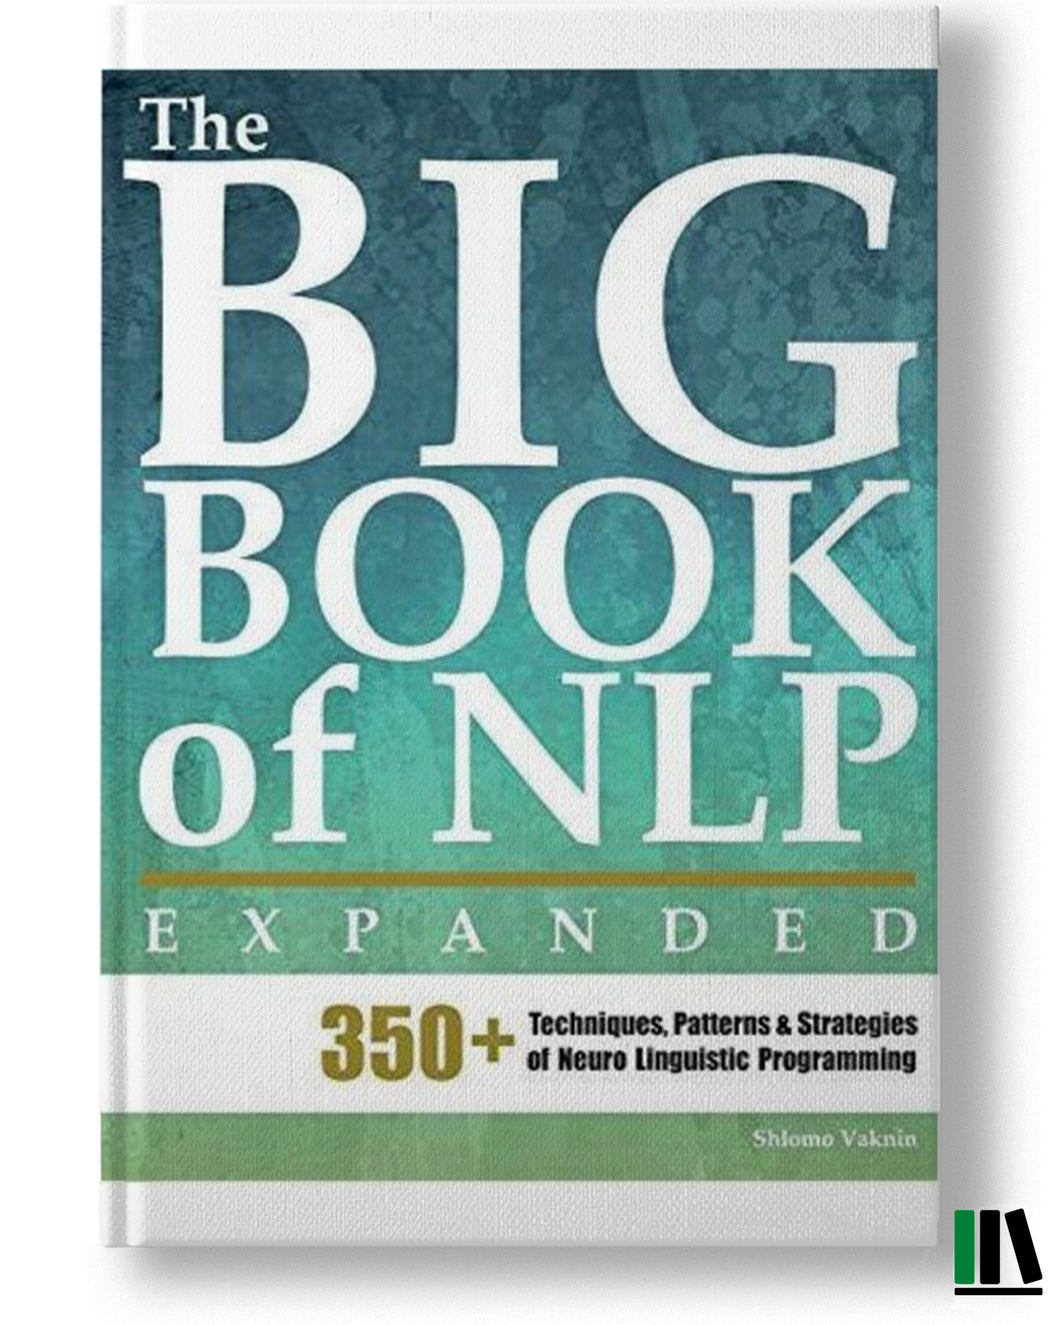 The Big Book of NLP, Expanded: 350+ Techniques, Patterns & Strategies of Neuro Linguistic Programming (NLP Neuro Linguistic Programming)